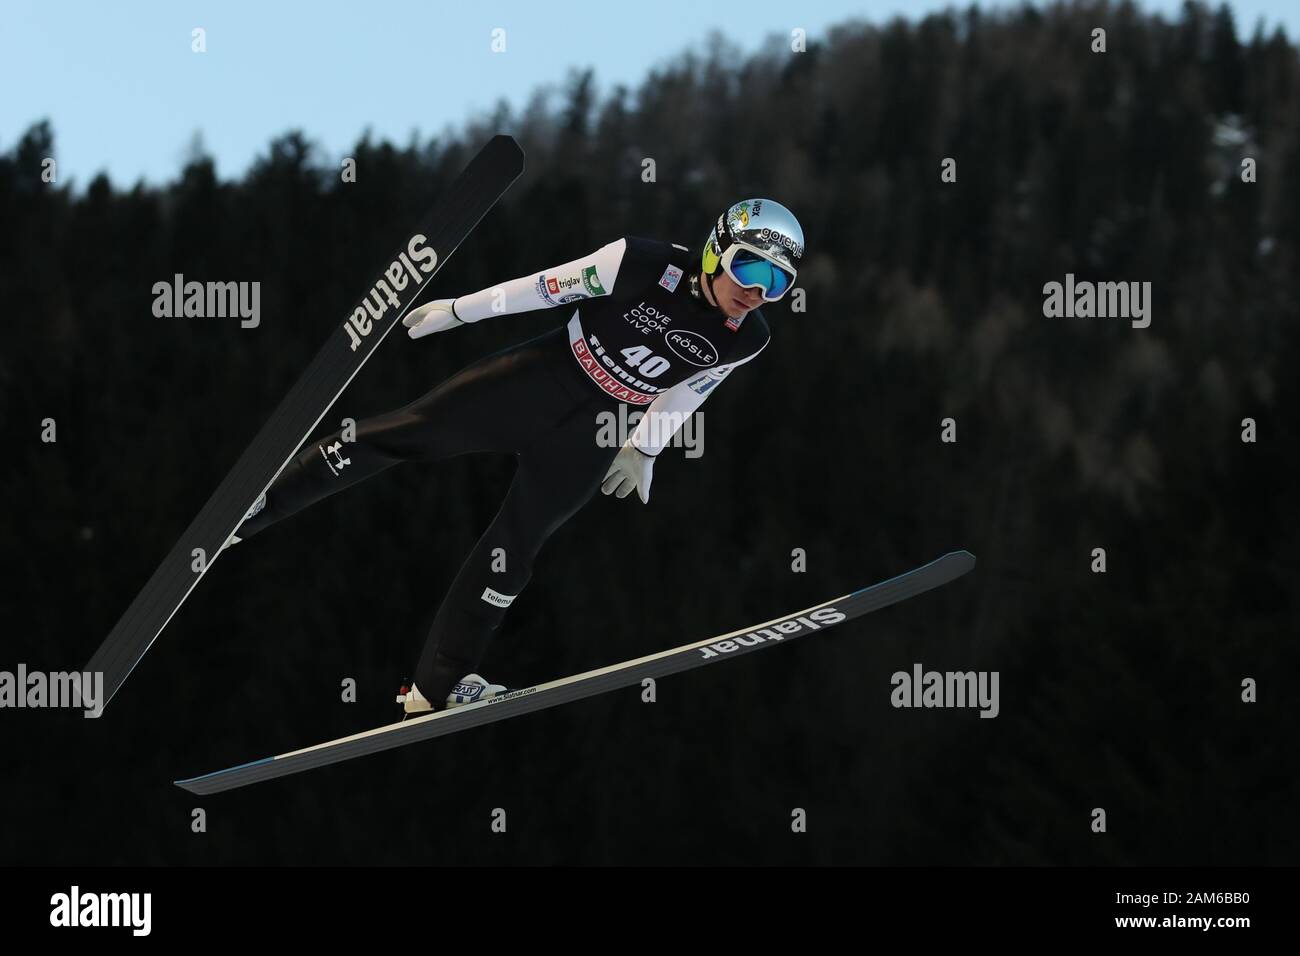 Predazzo, Italy. 11th Jan, 2020. FIS Ski Jumping World Cup in Predazzo, Italy on January 11, 2020, Anze Lanisek (SLO) in action. .Photo: Pierre Teyssot / Espa-Images Credit: Cal Sport Media/Alamy Live News Stock Photo